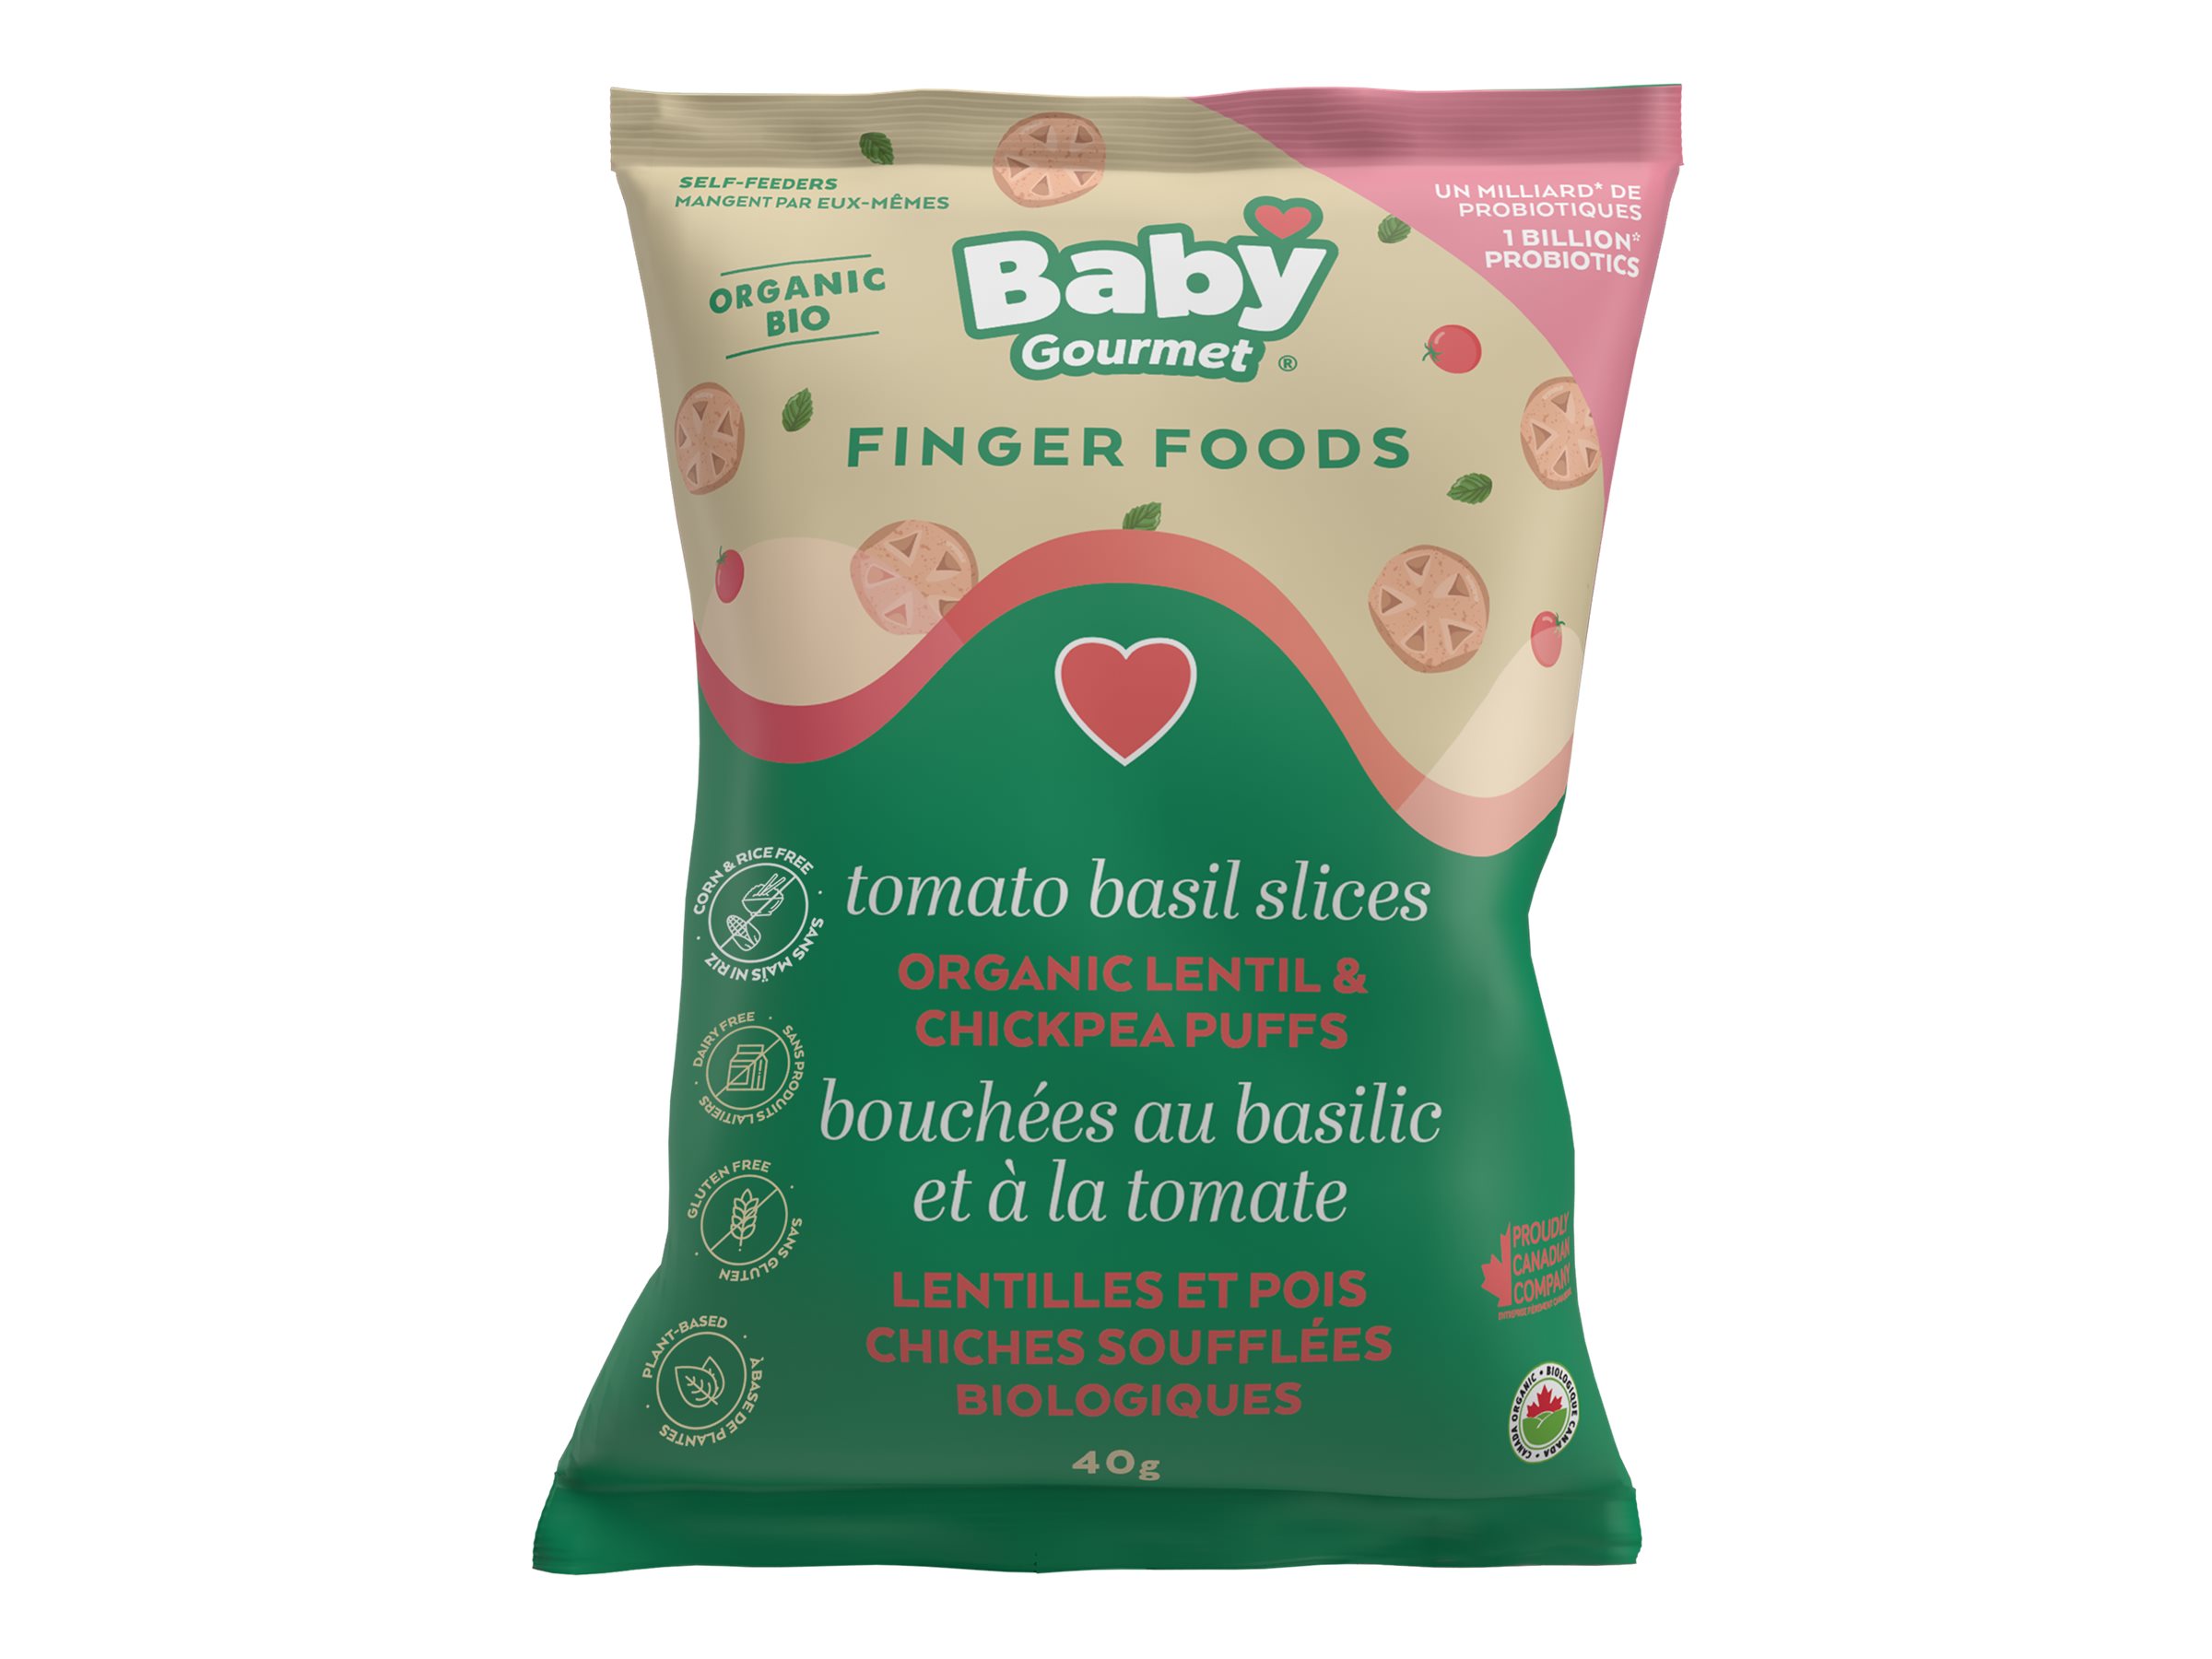 Baby Gourmet Finger Foods Lentil and Chickpea Puffs - Tomato Basil Slices - 40g